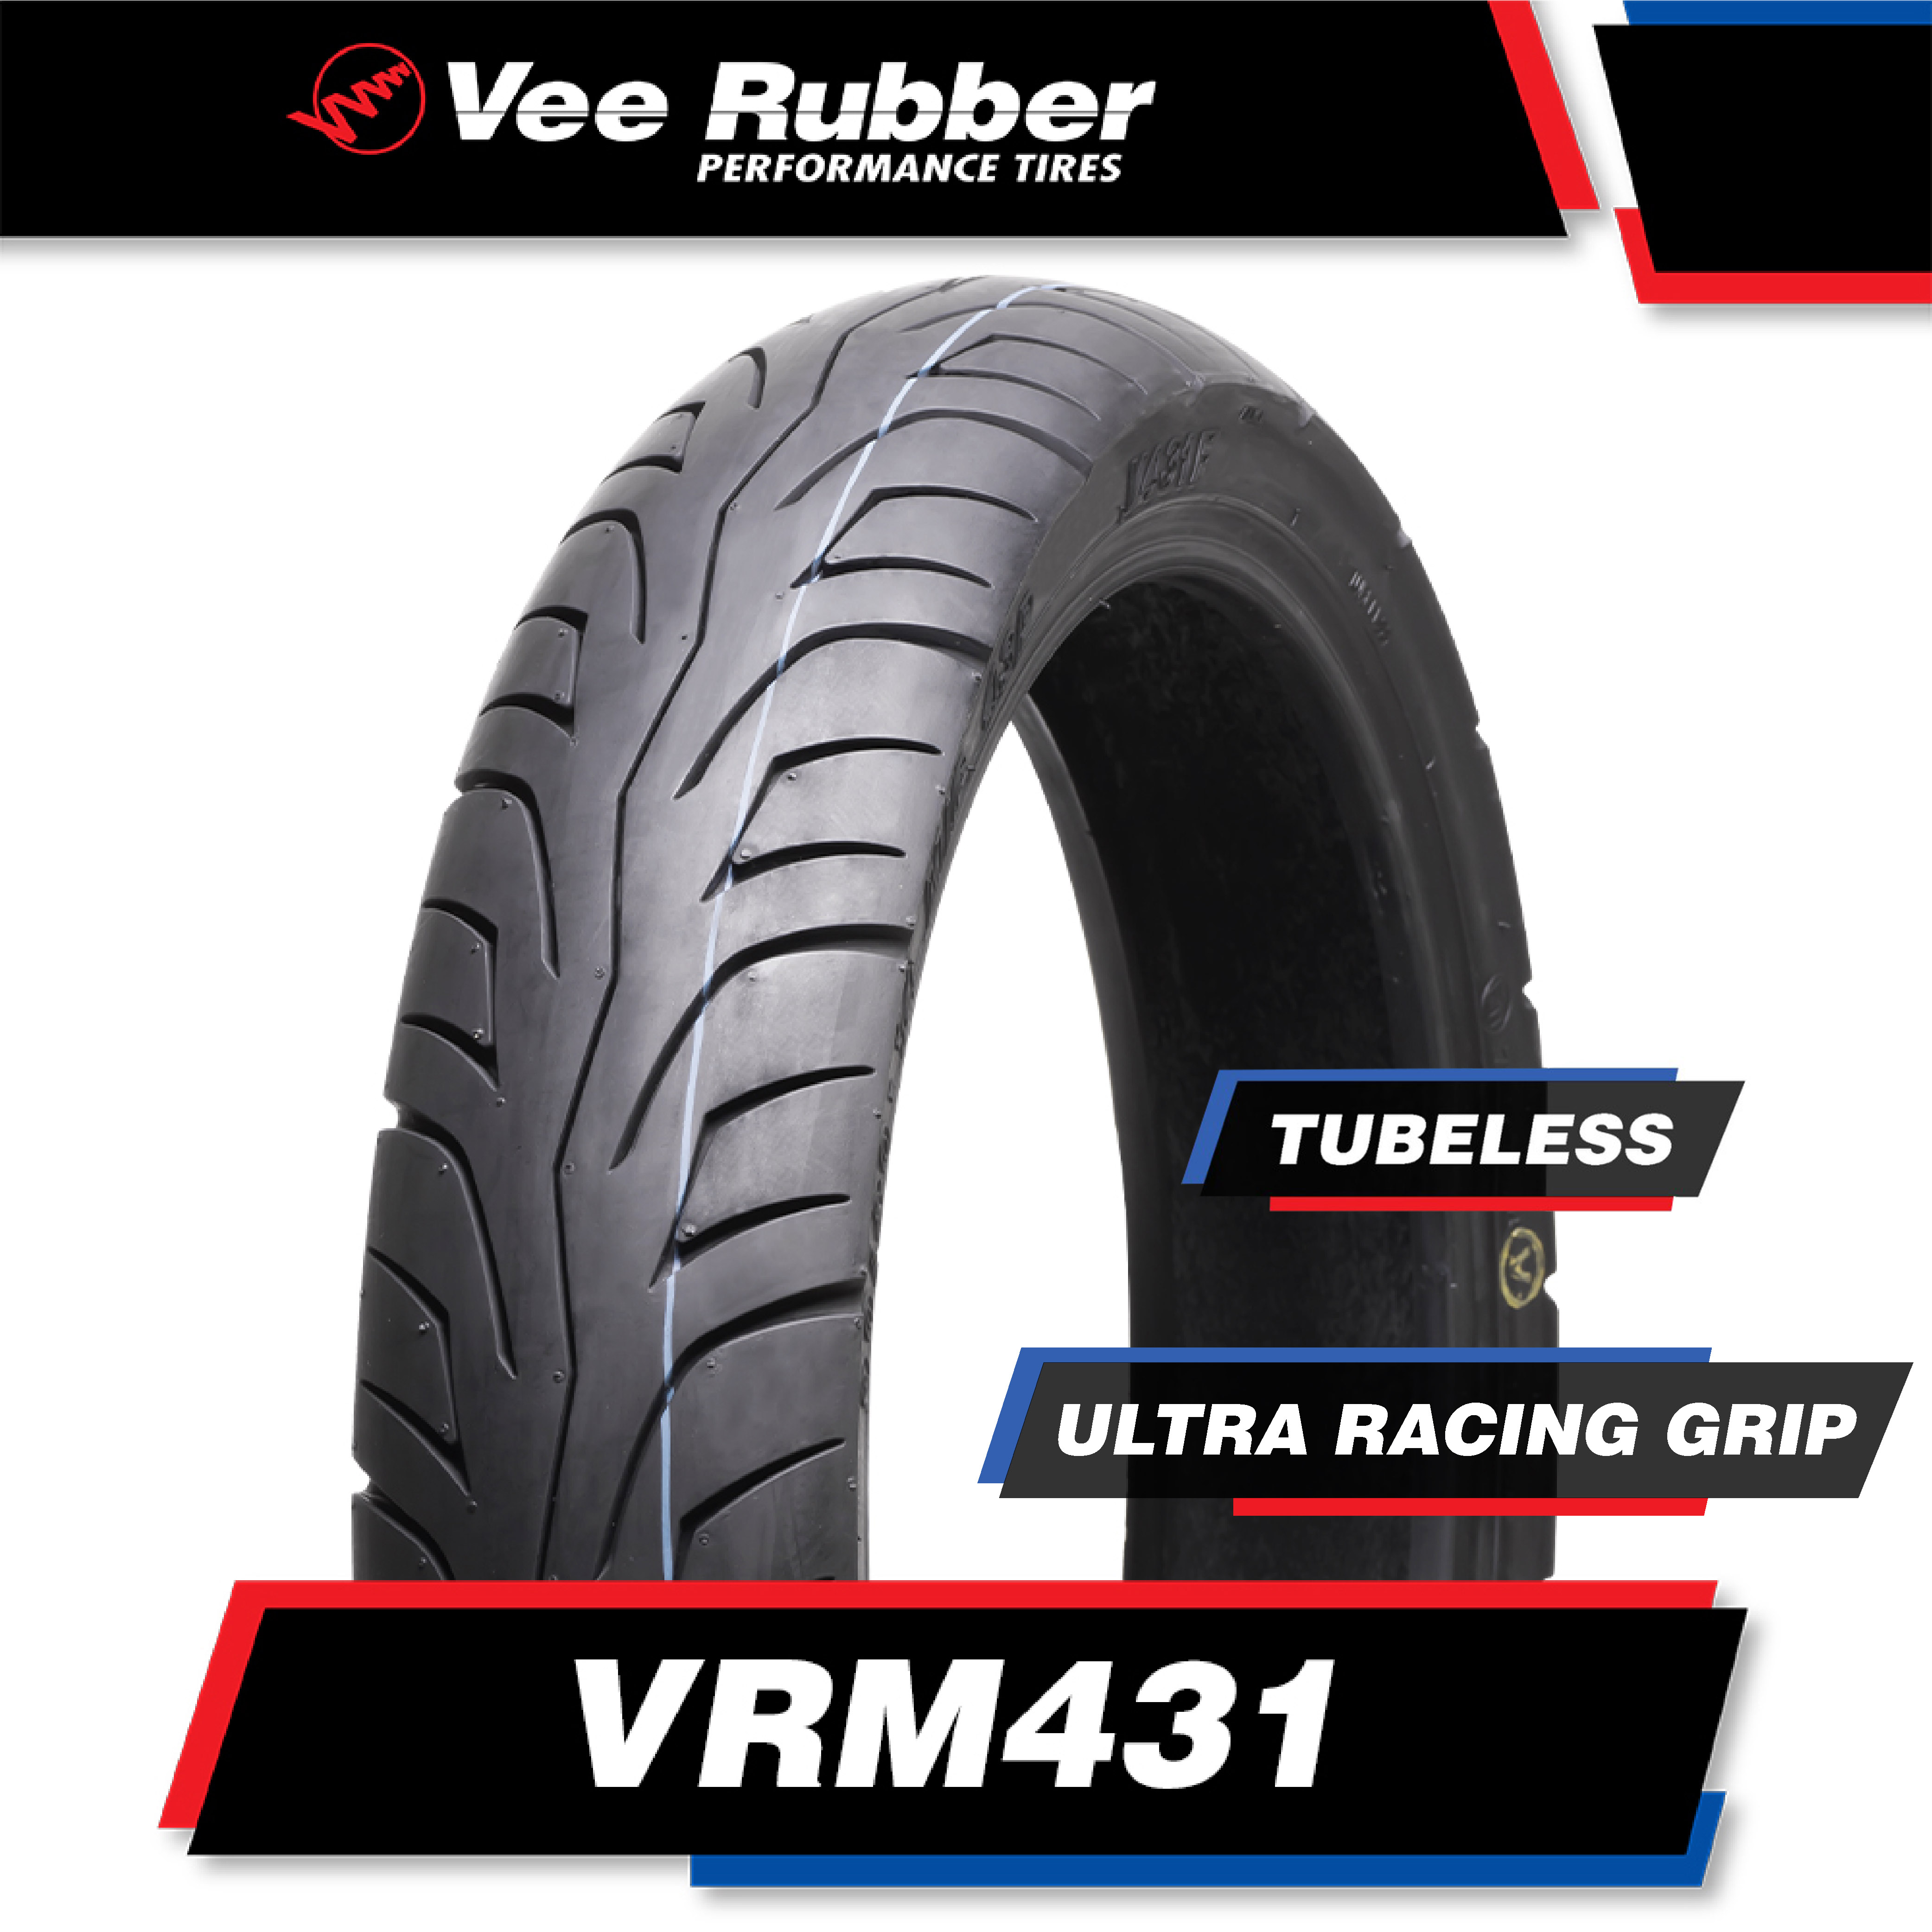 80 80 14 43p Tl Vee Rubber Ultra Racing Grip Vrm431 Motorcycle Tires Tubeless Honda Click 150i Shopee Philippines